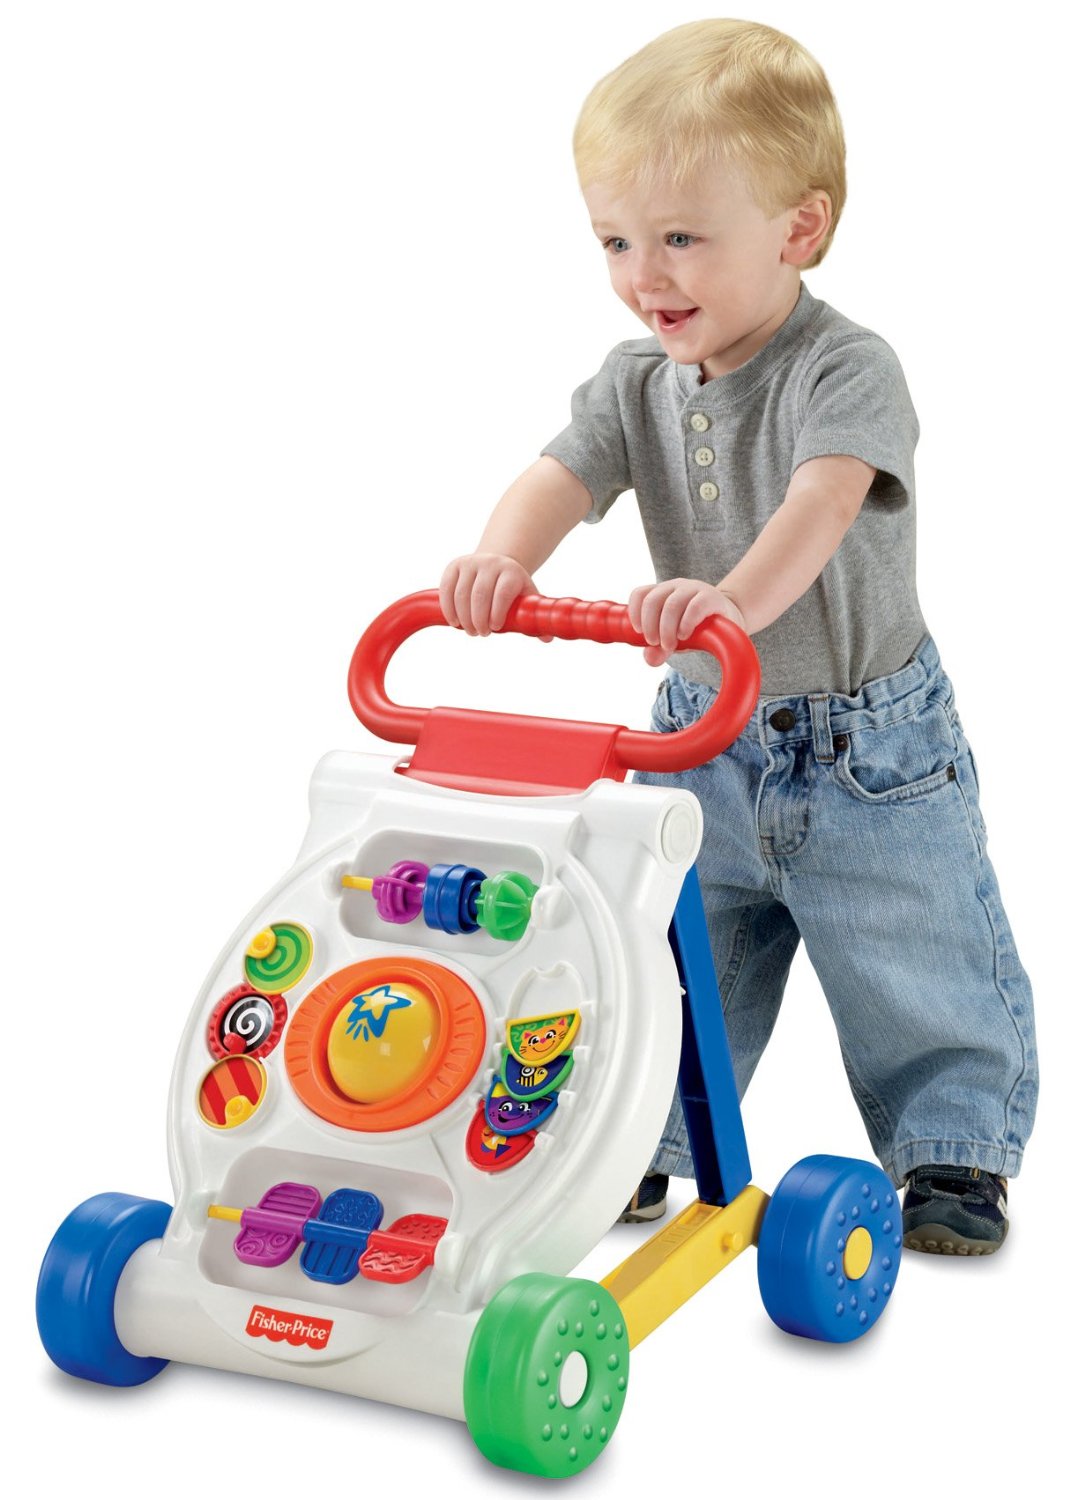 toys to help baby walk